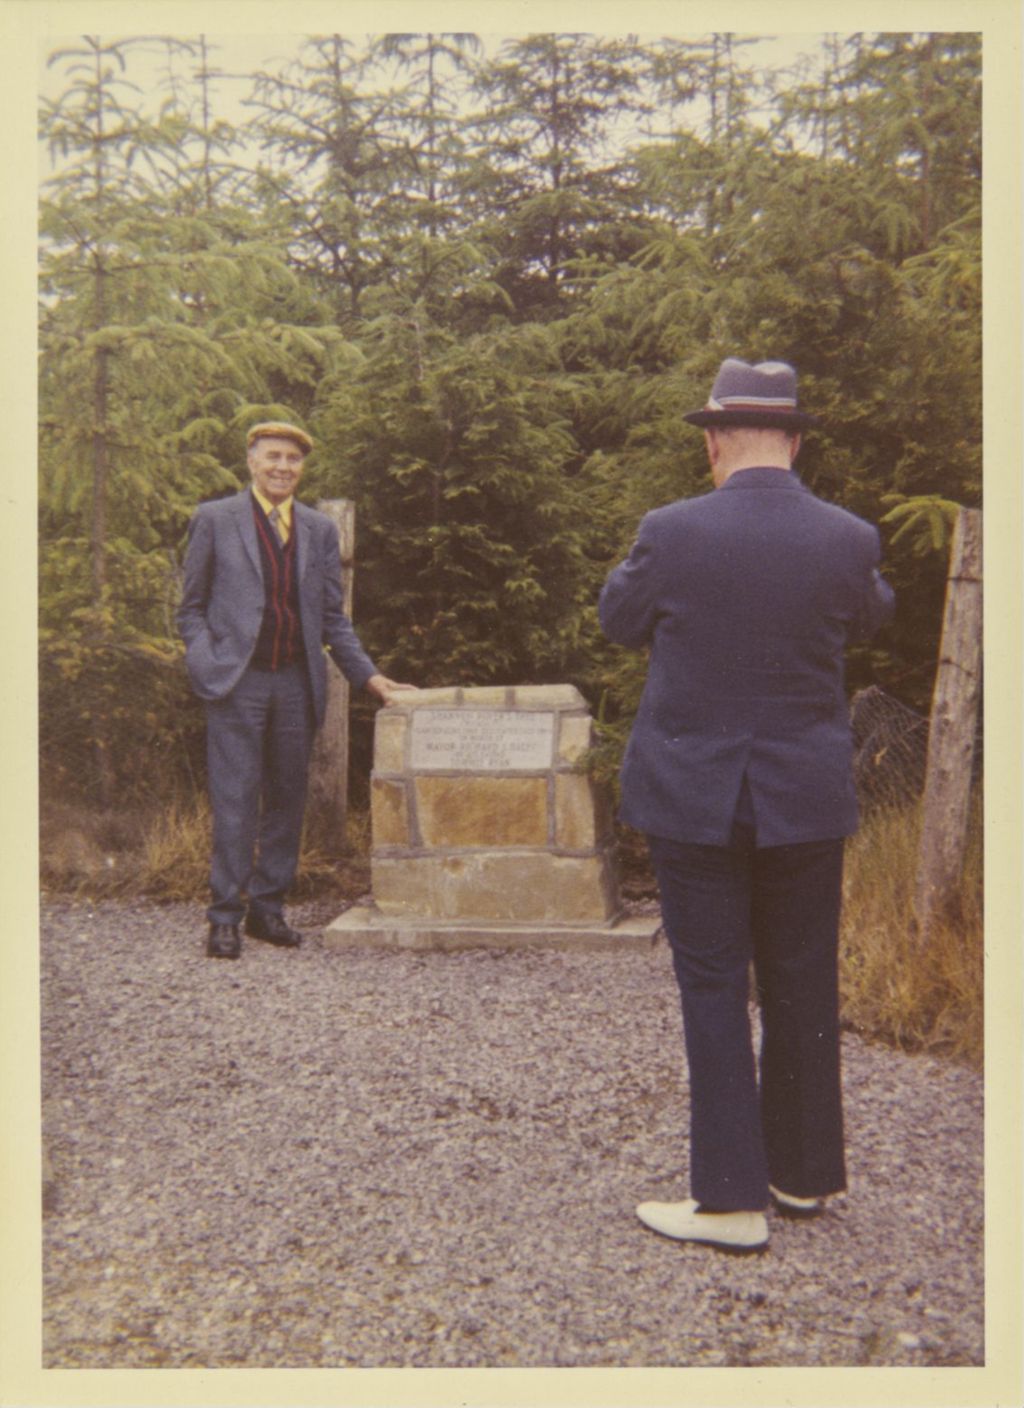 Miniature of Monument for tree in Ireland dedicated to Richard J. Daley